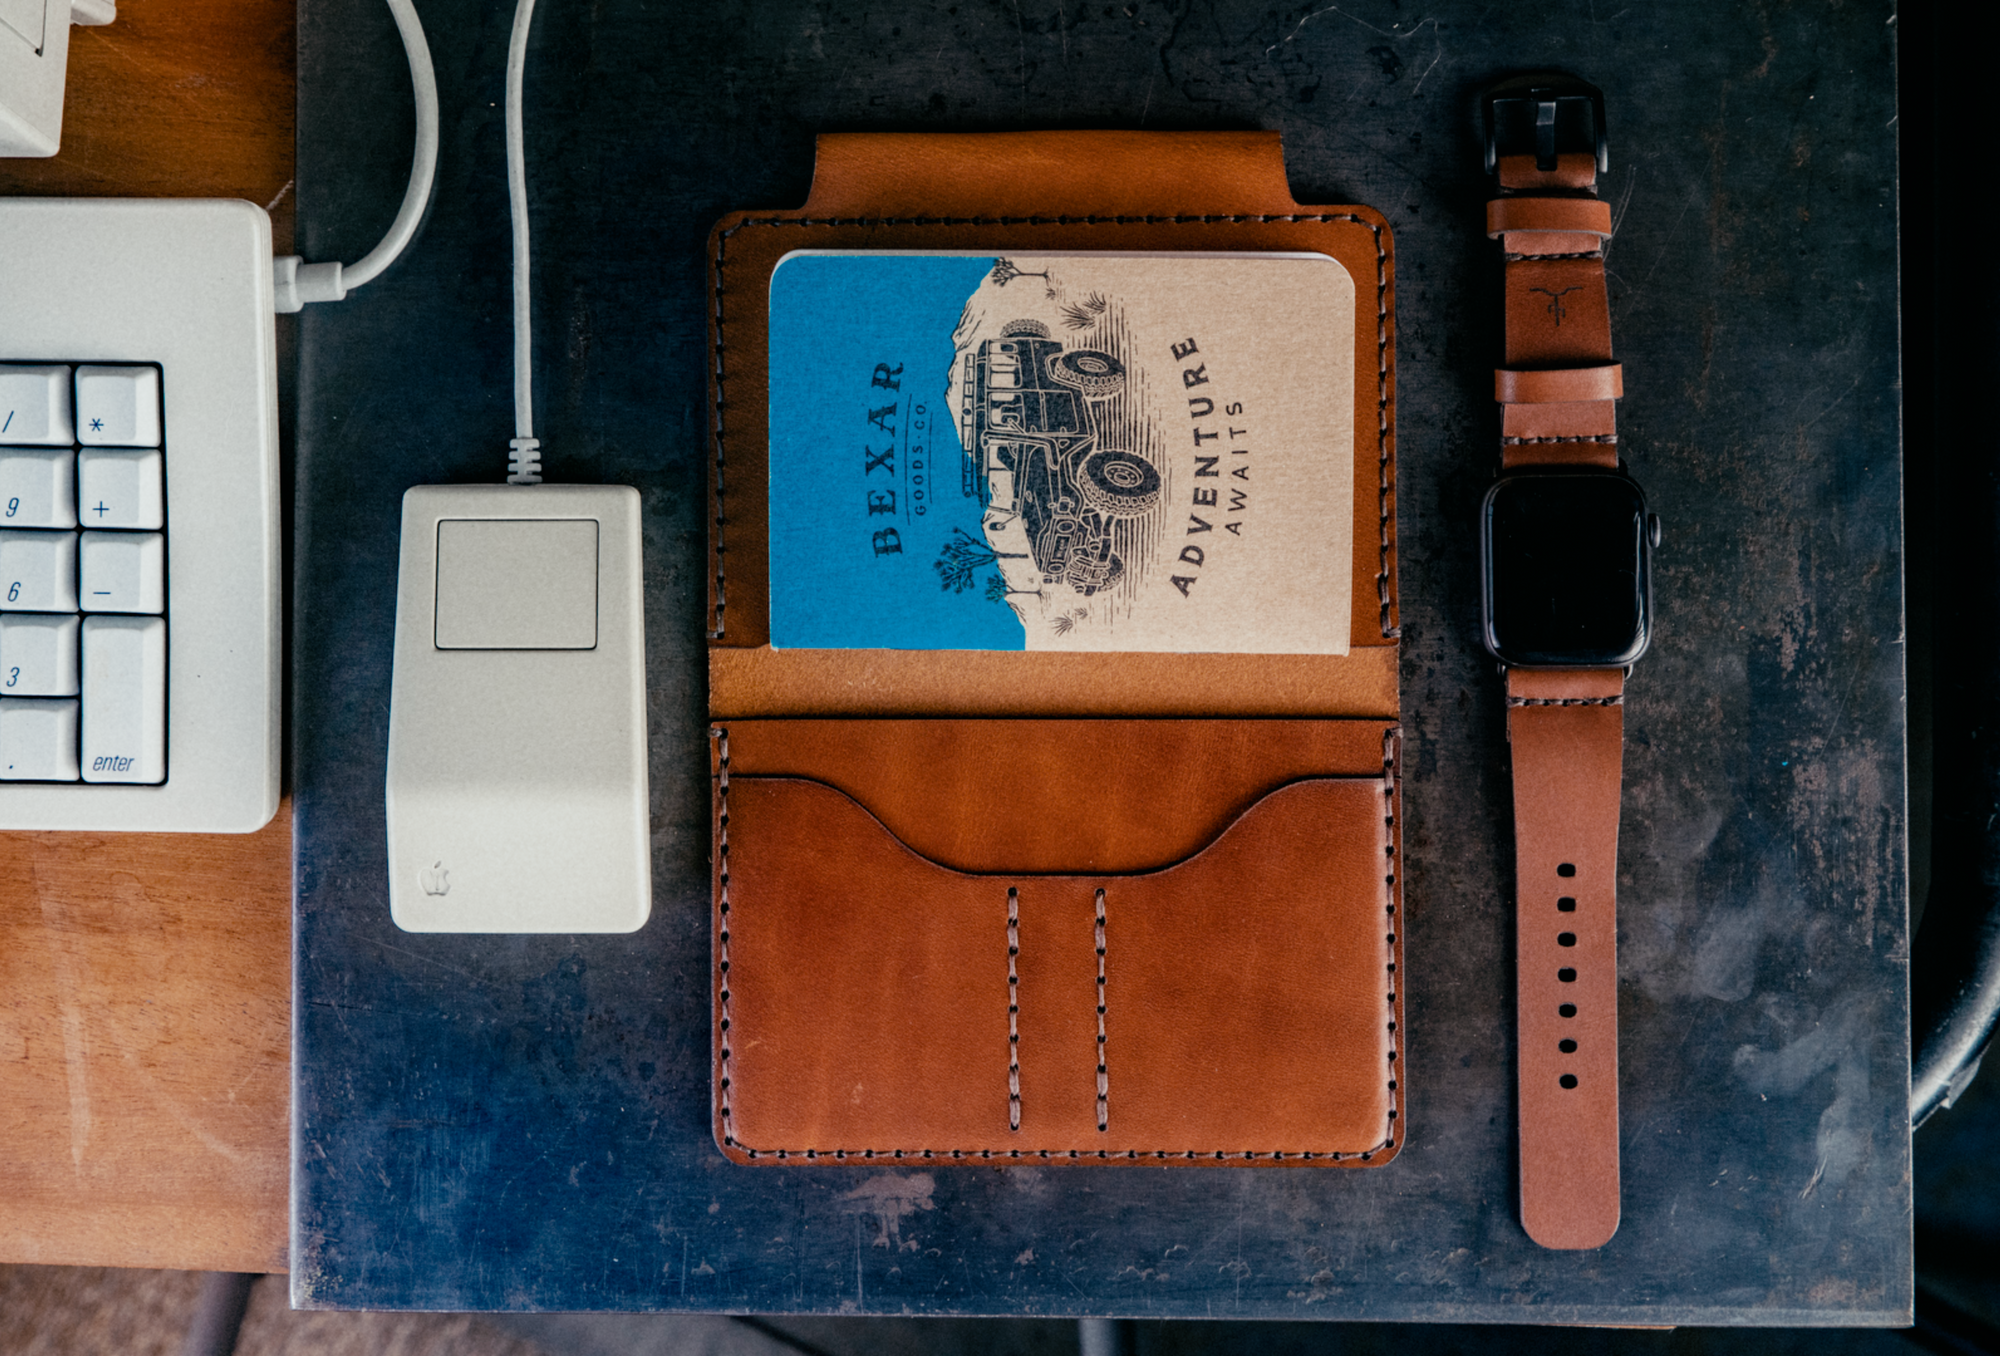 Field notes wallet and watch sitting on steel plate next to a retro computer mouse